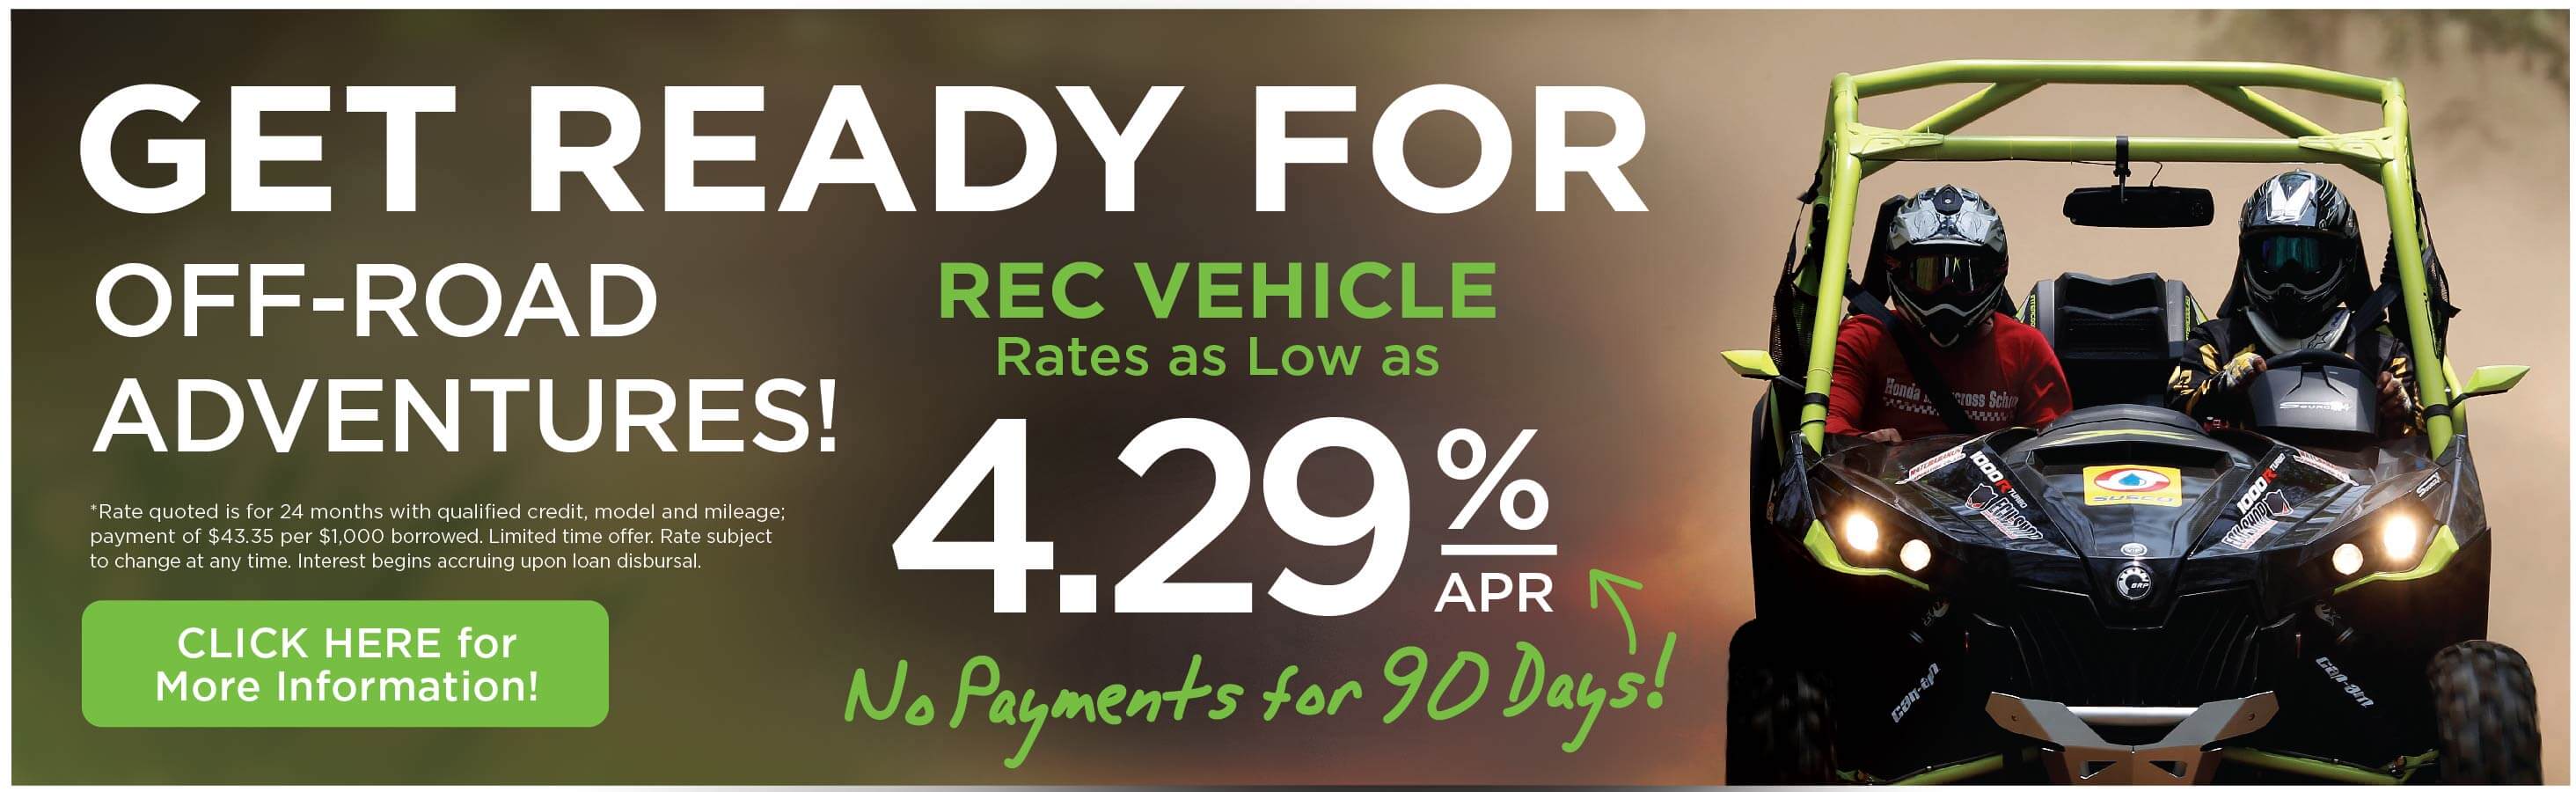 Rates as Low as 4.29% APY